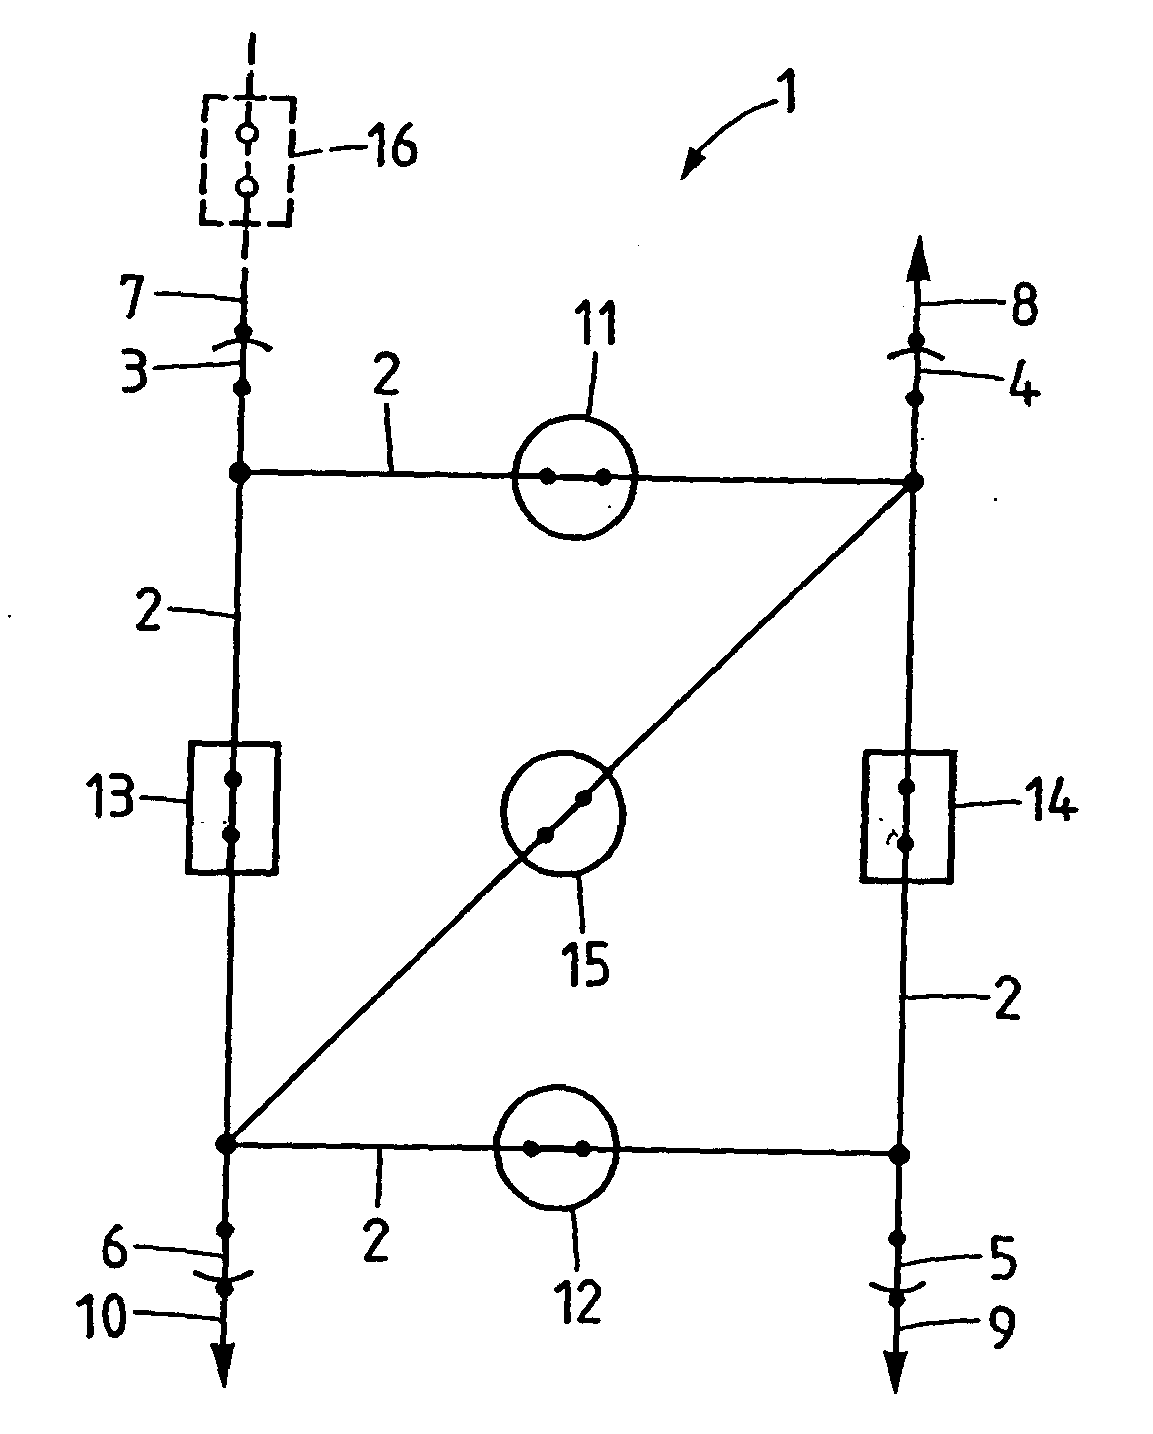 Switchgear assembly for distribution of electrical power